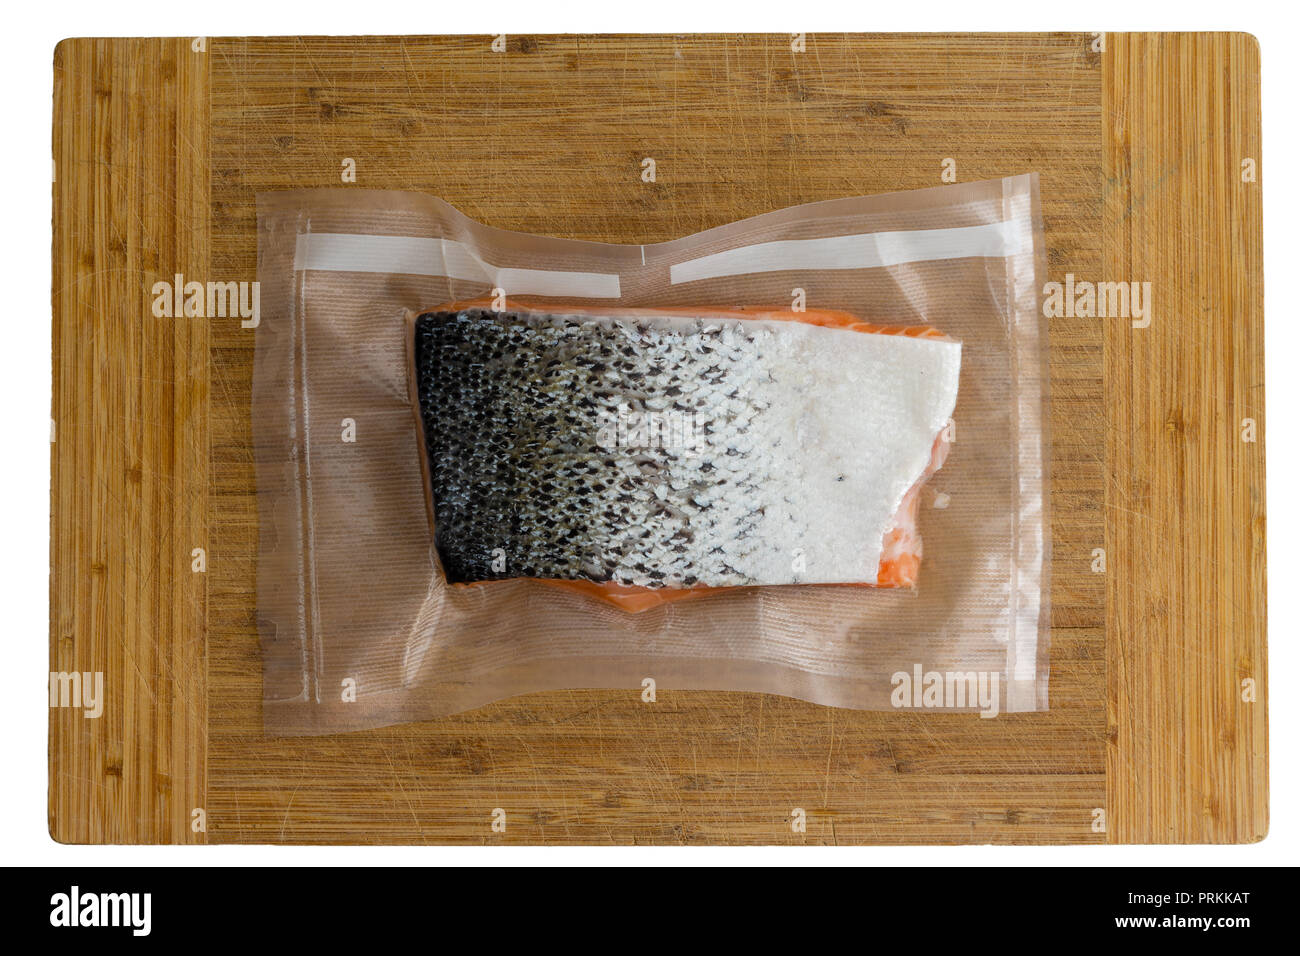 Top view of a fresh raw portion of Atlantic salmon vacuum packed in clear plastic ready for freezing or sous-vide cooking on a wooden board Stock Photo